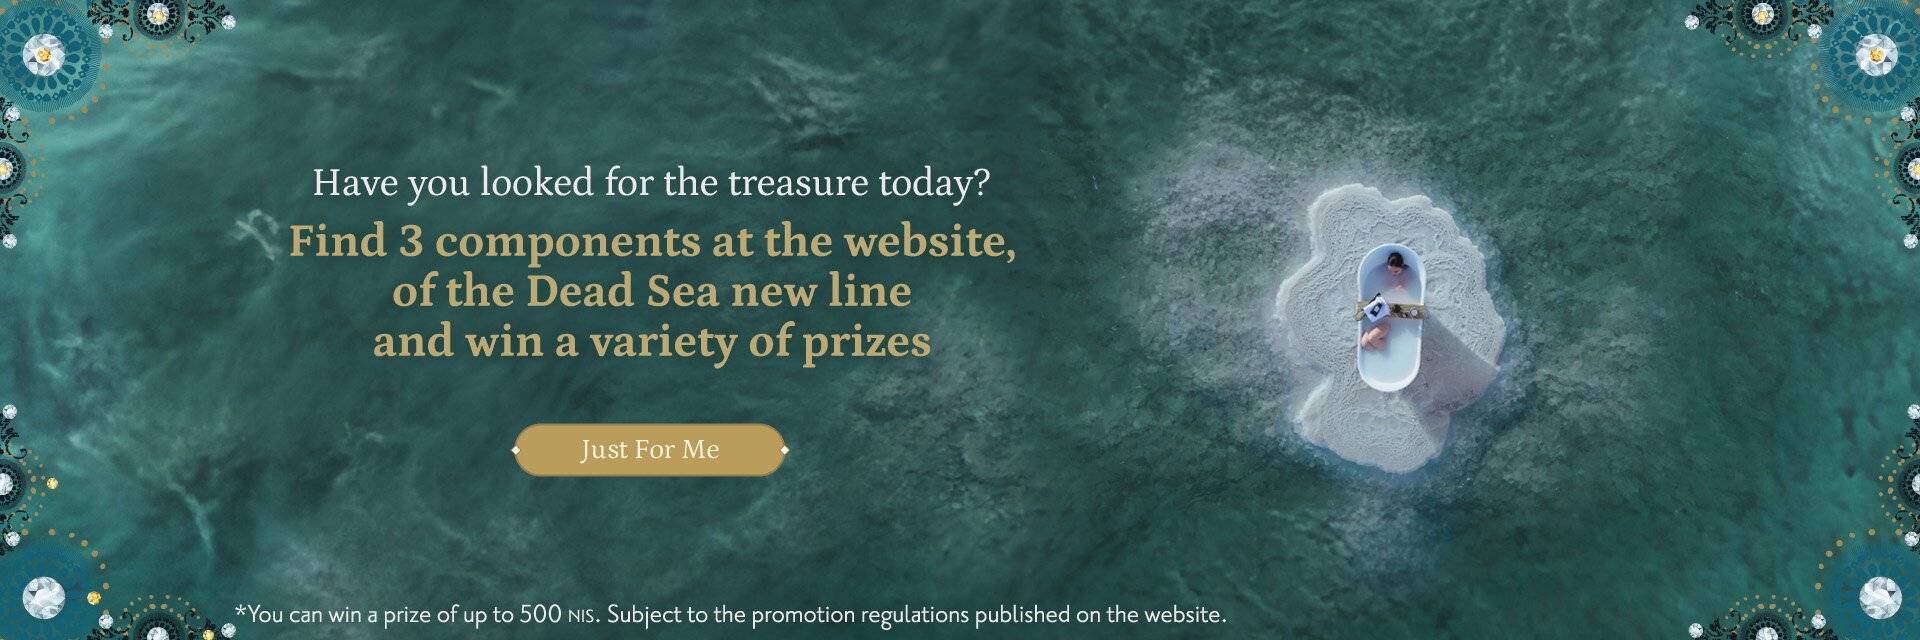 FIND THE DEAD SEA TREASURES HIDDEN THROUGHOUT THE WEBSITE AND WIN A SURPRISE GIFT!: 